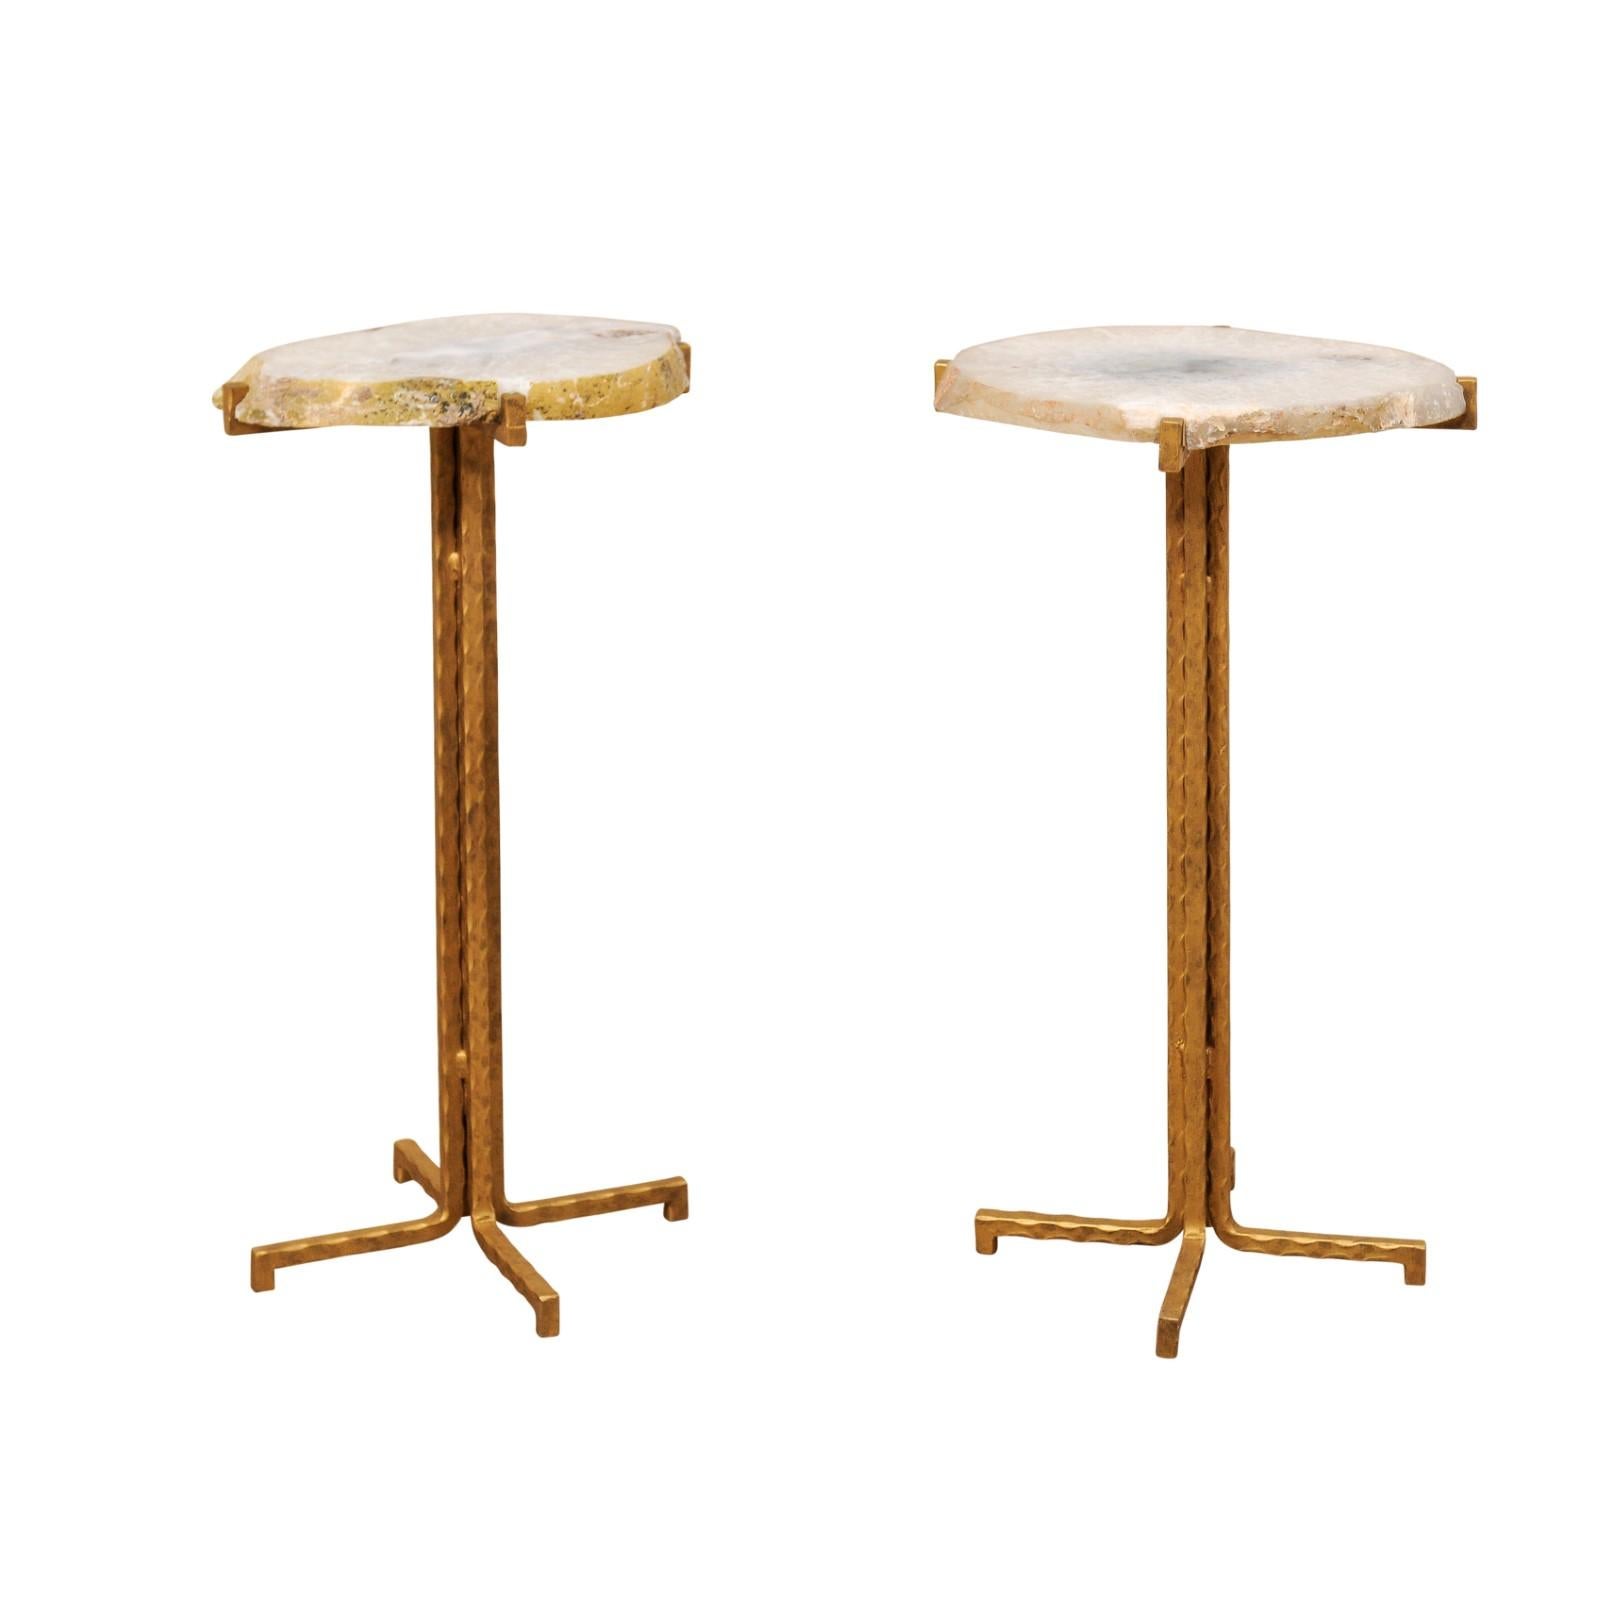 Pair of Custom Quartz Top Drink Tables with Gold Iron Base